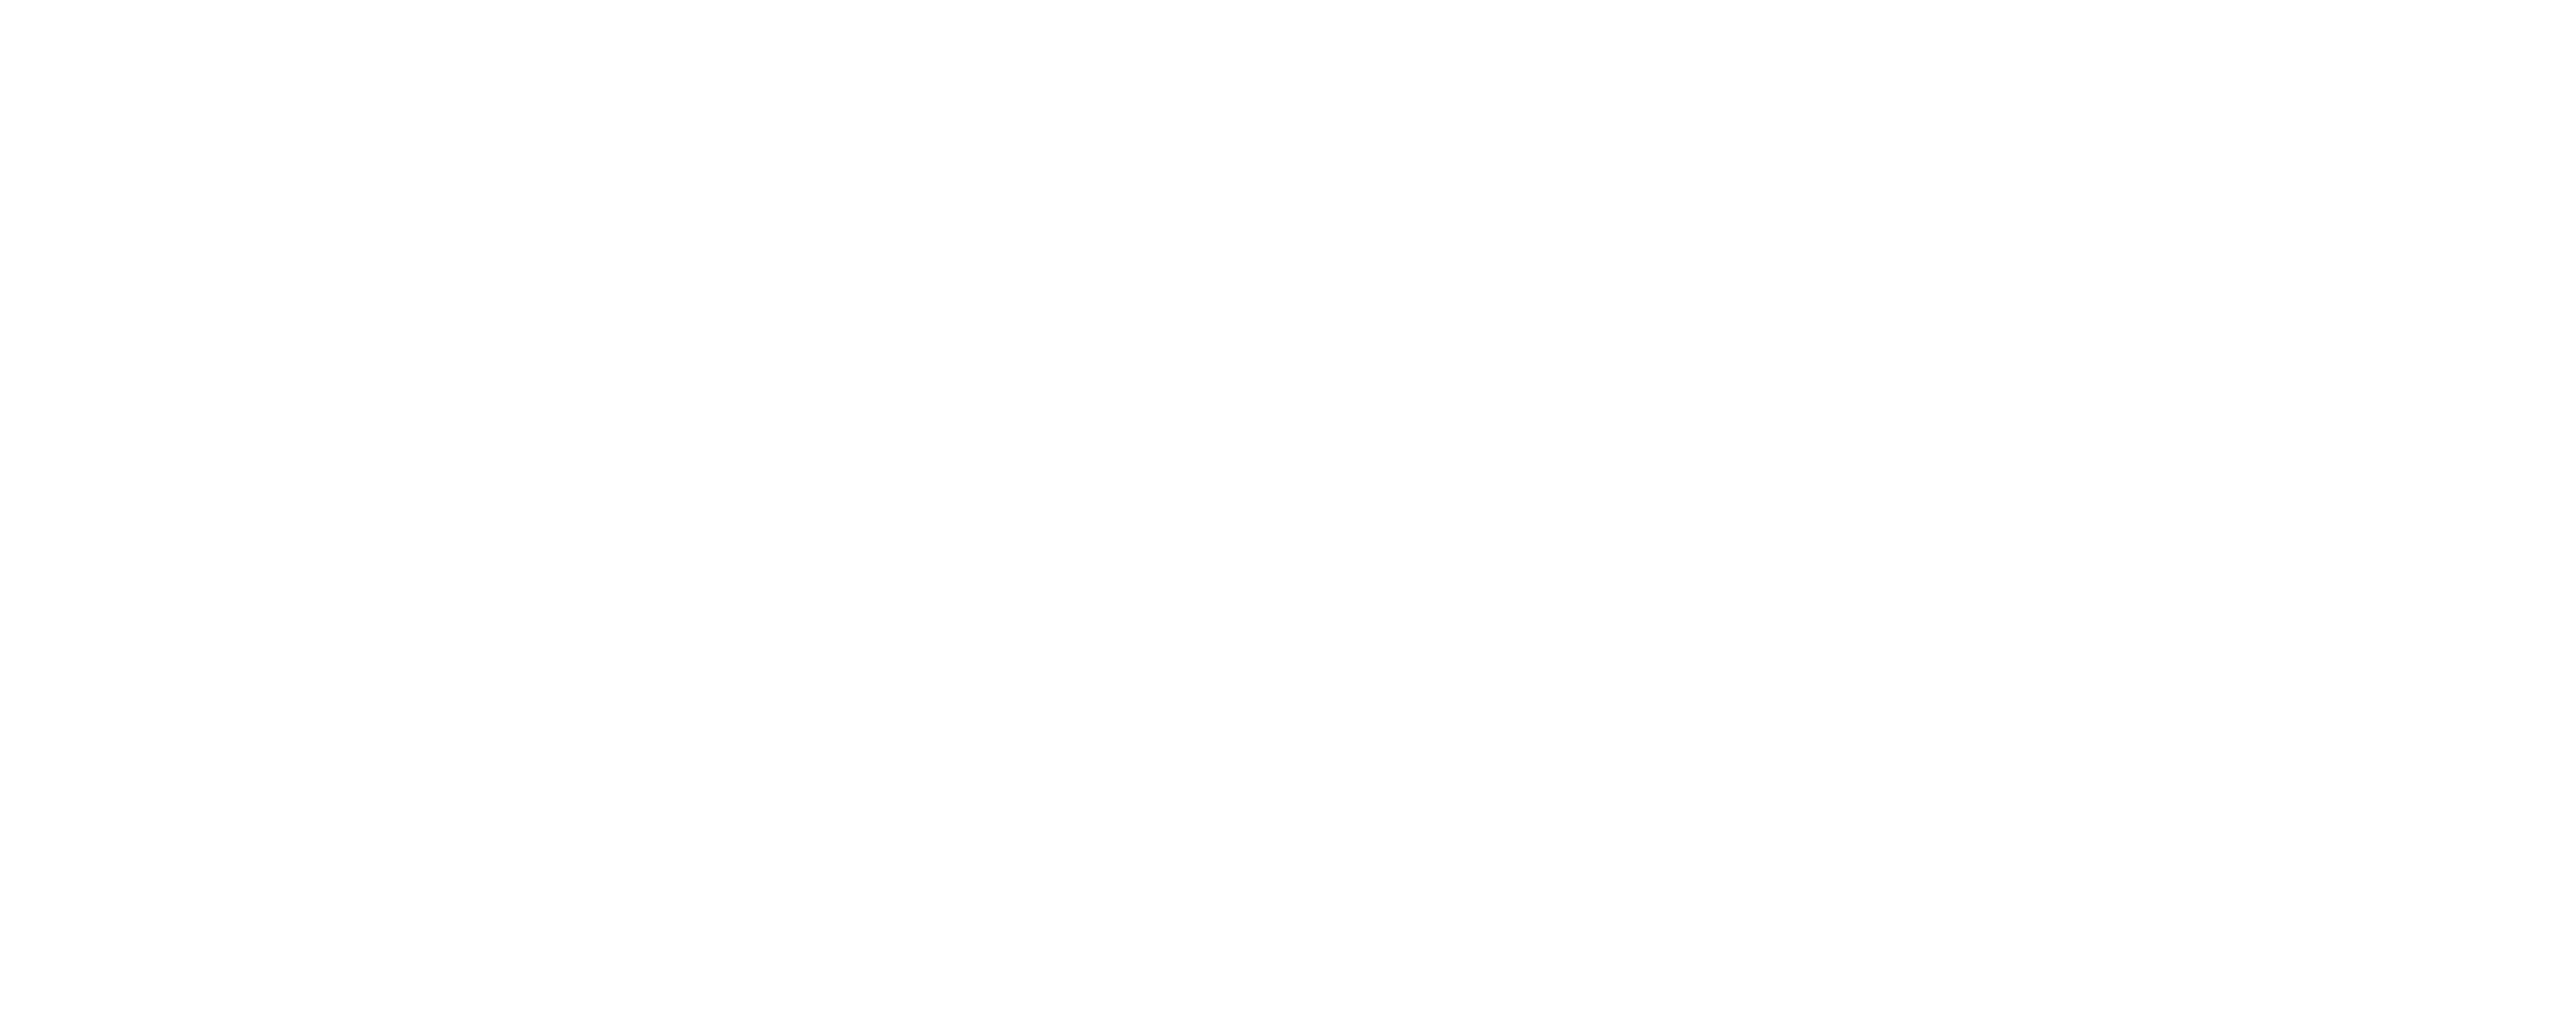 Splitsville and Howl At The Moon